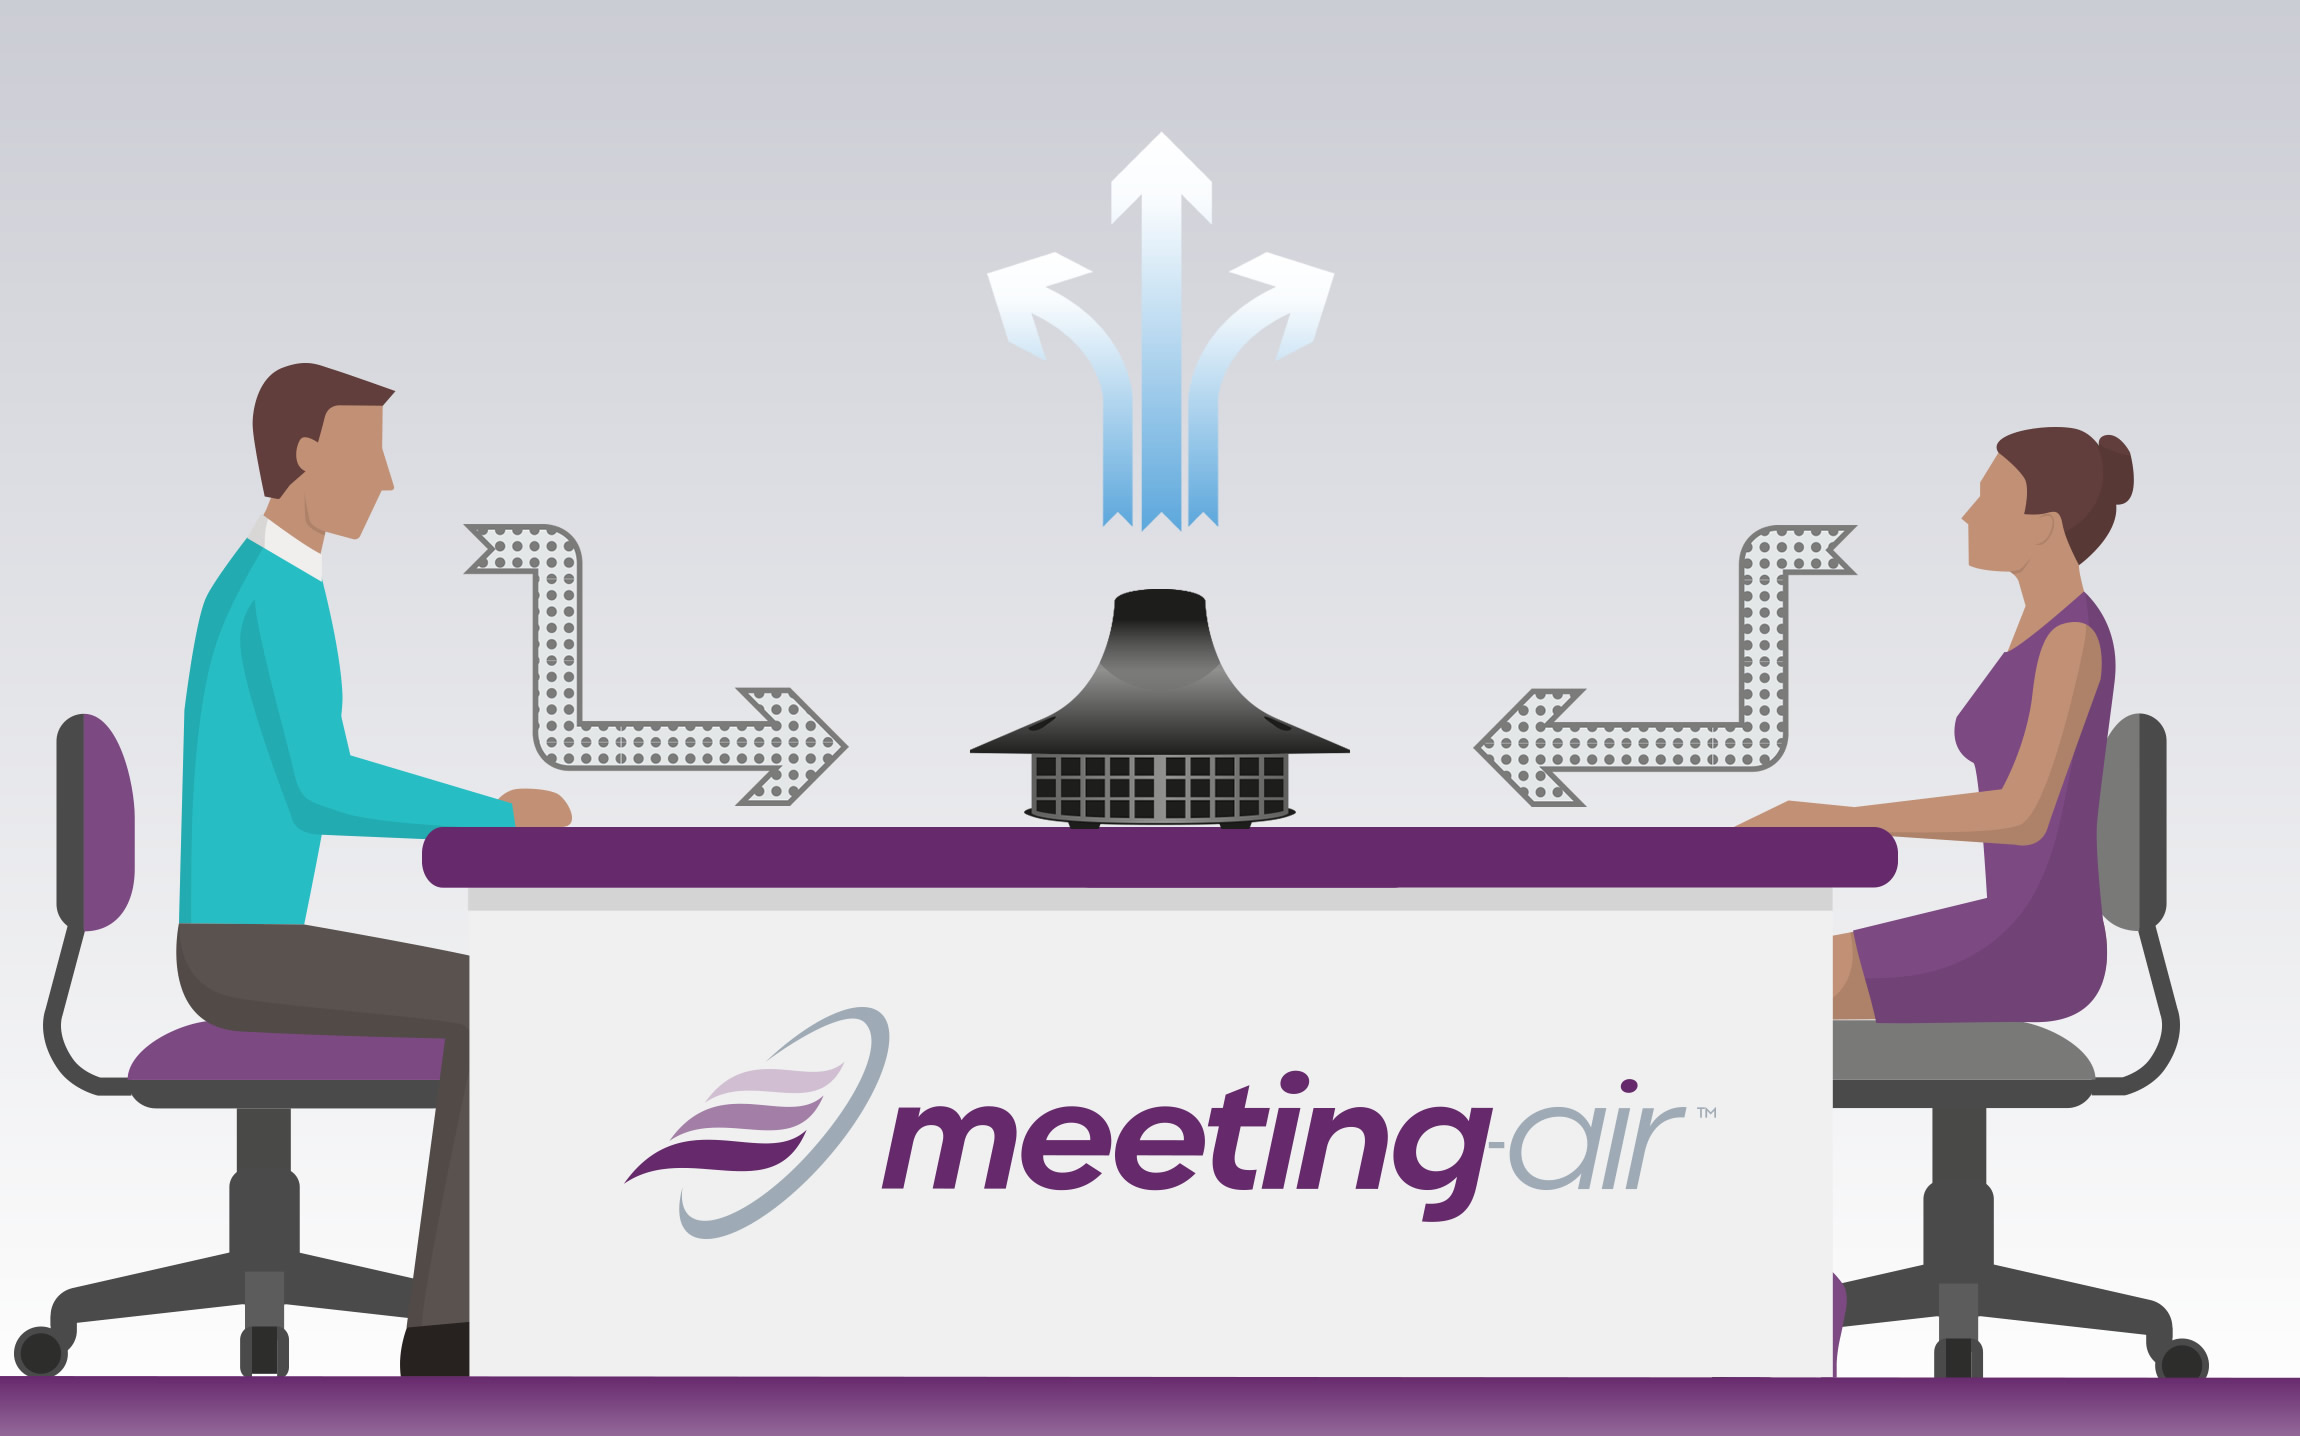 Innovative technology for face-to-face meetings